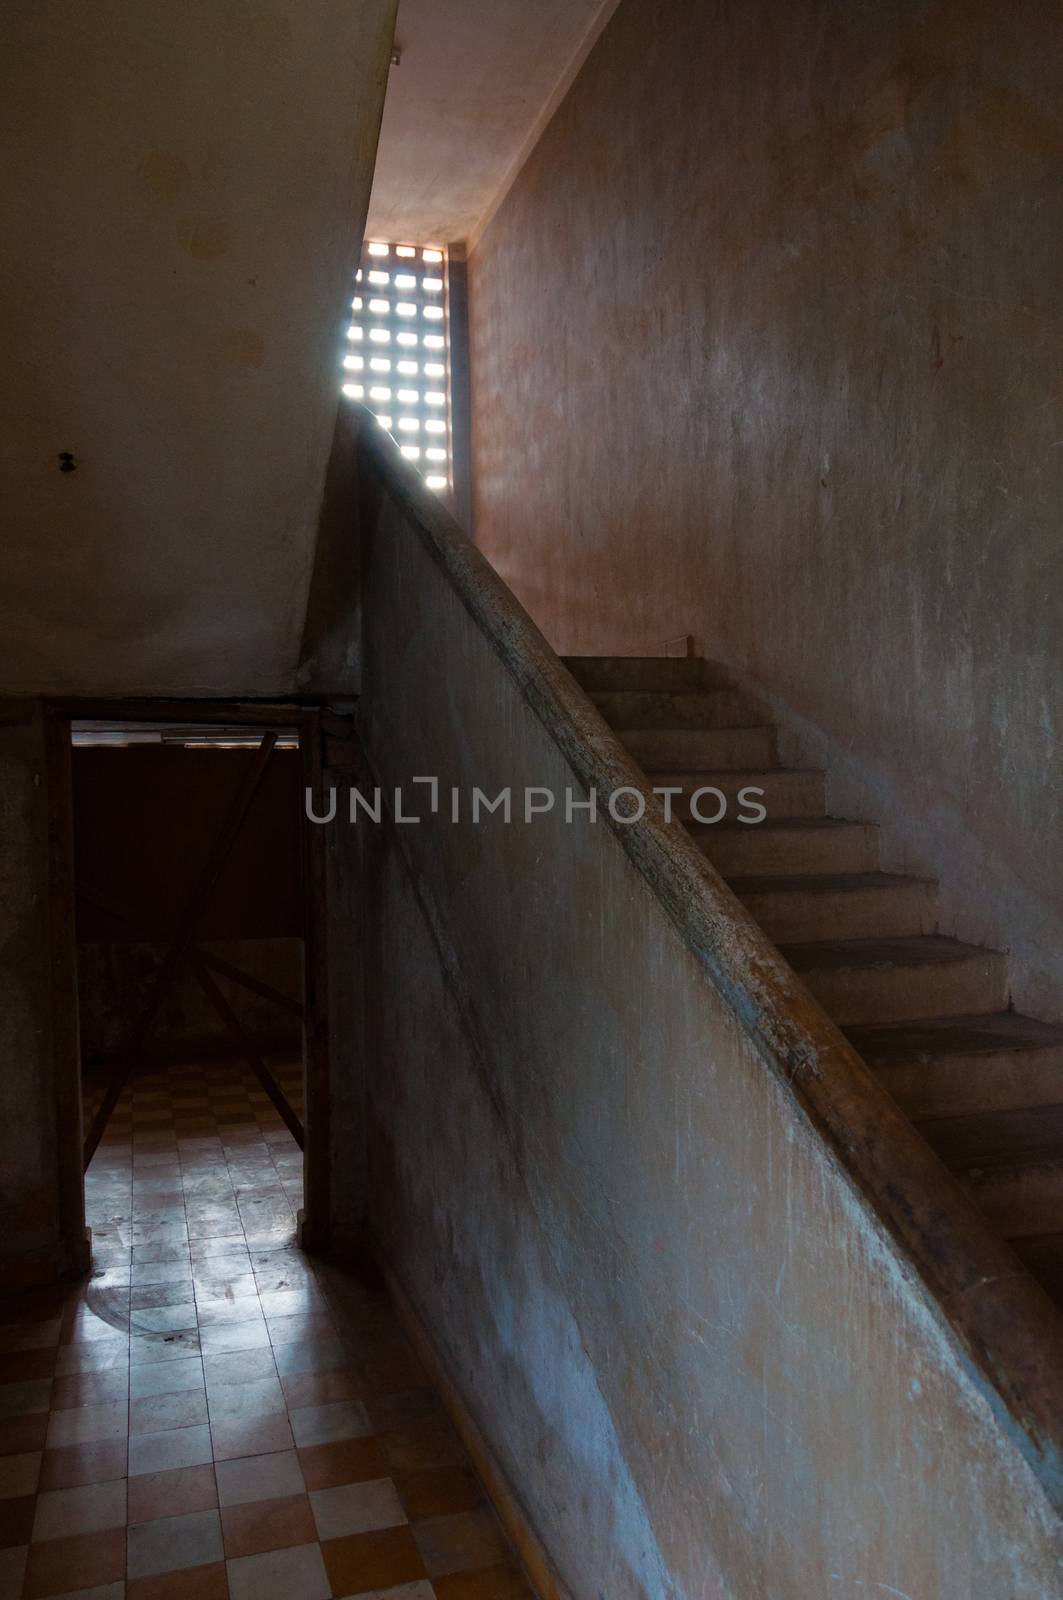 Stairs at S21 Tuol Sleng in Phnom Penh by attiarndt